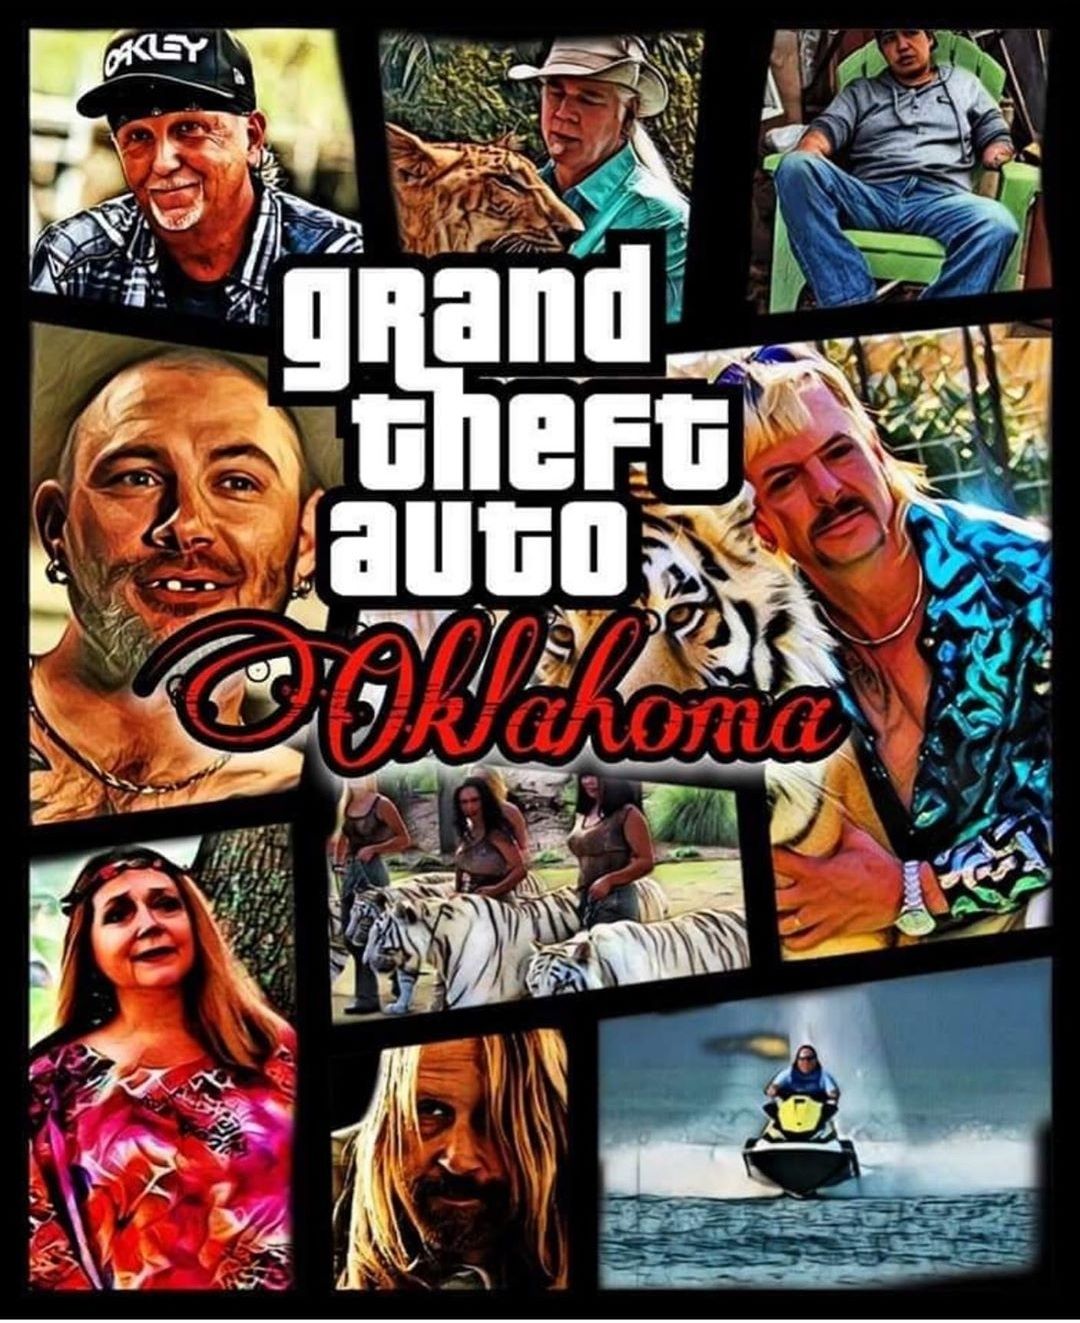 The new GTA game looks wild, and exotic